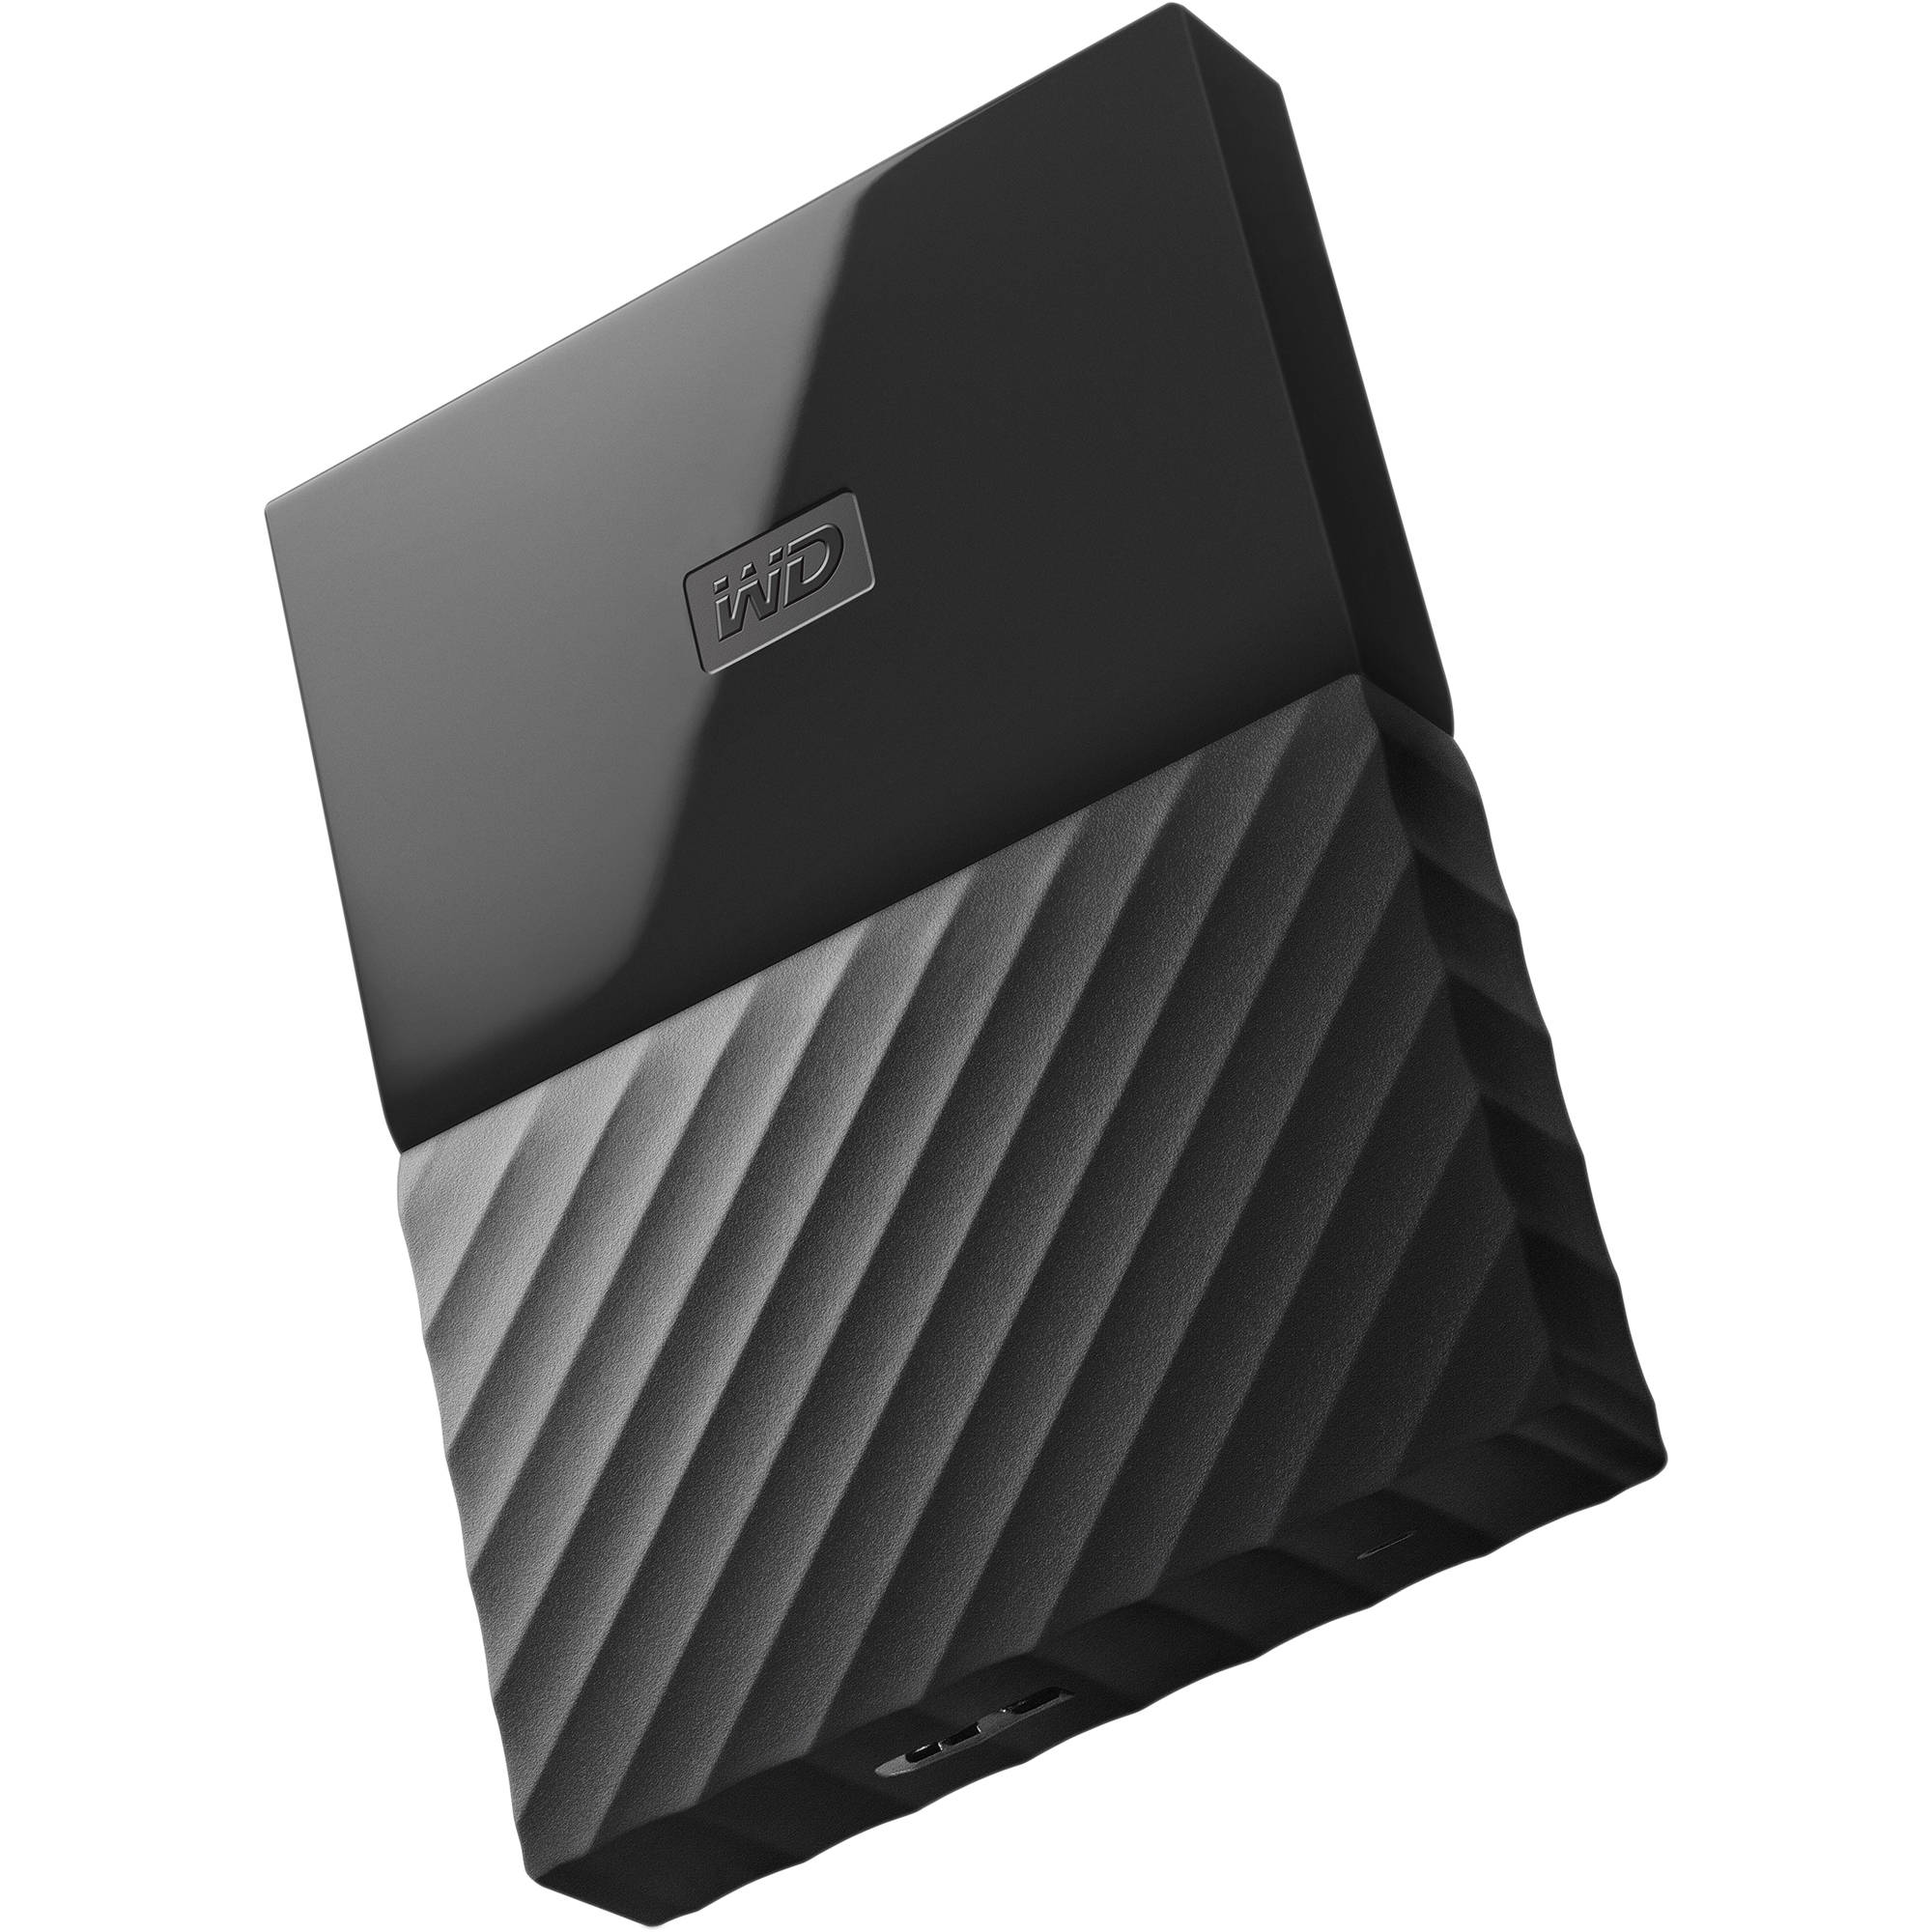 what format should i use for my wd passport for mac